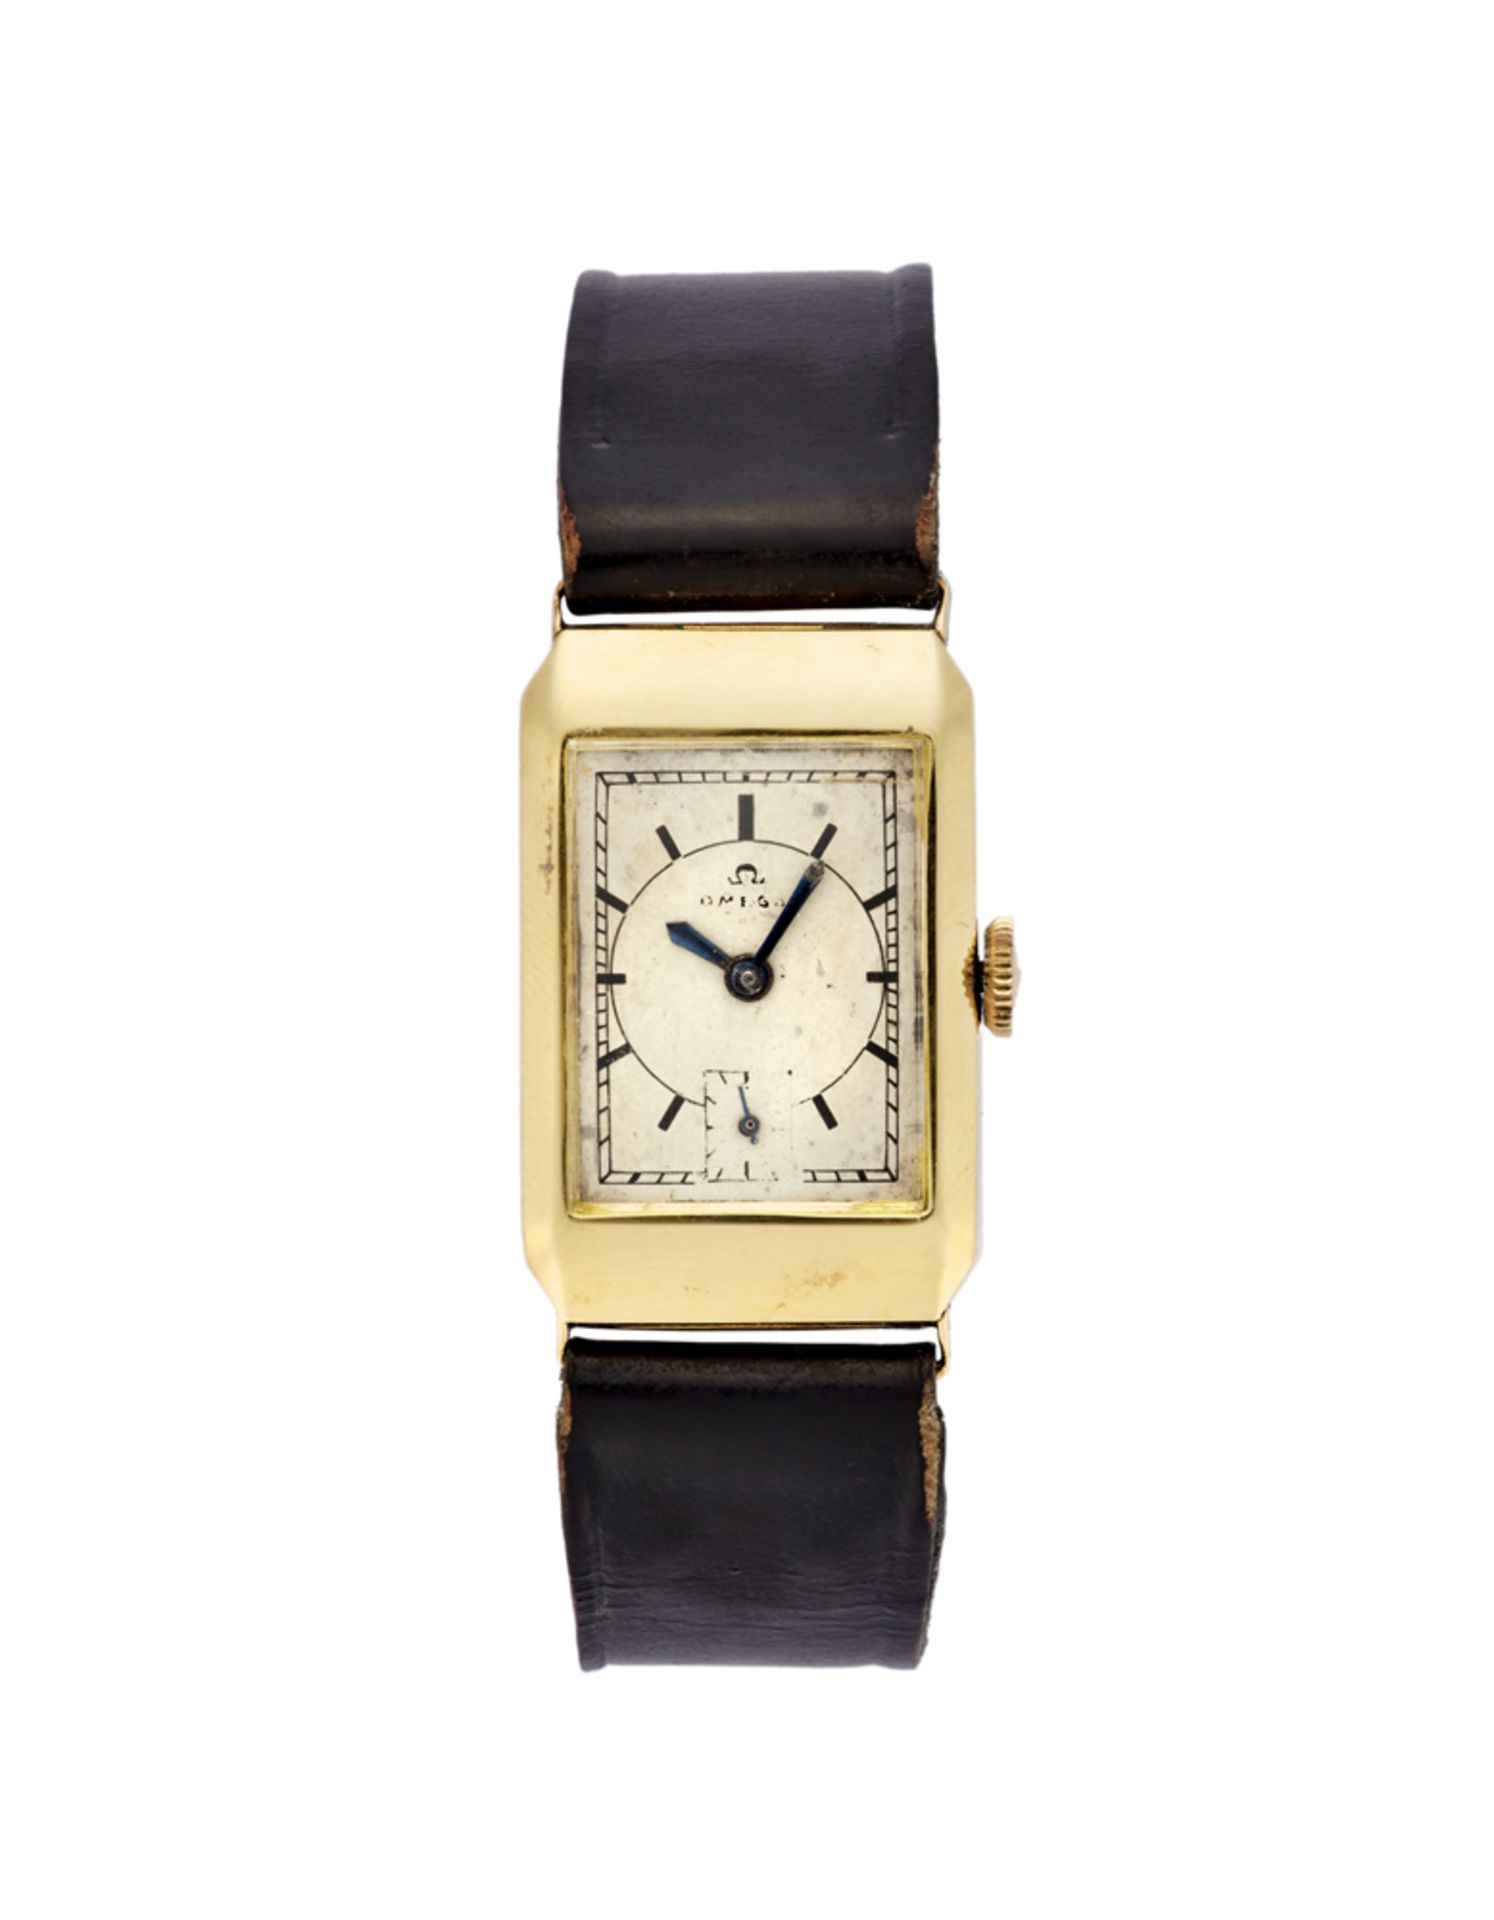 OMEGA<br>Gent's 18K gold wristwatch<br>1930s<br>Dial, movement and case signed<br>Manual-wind moveme